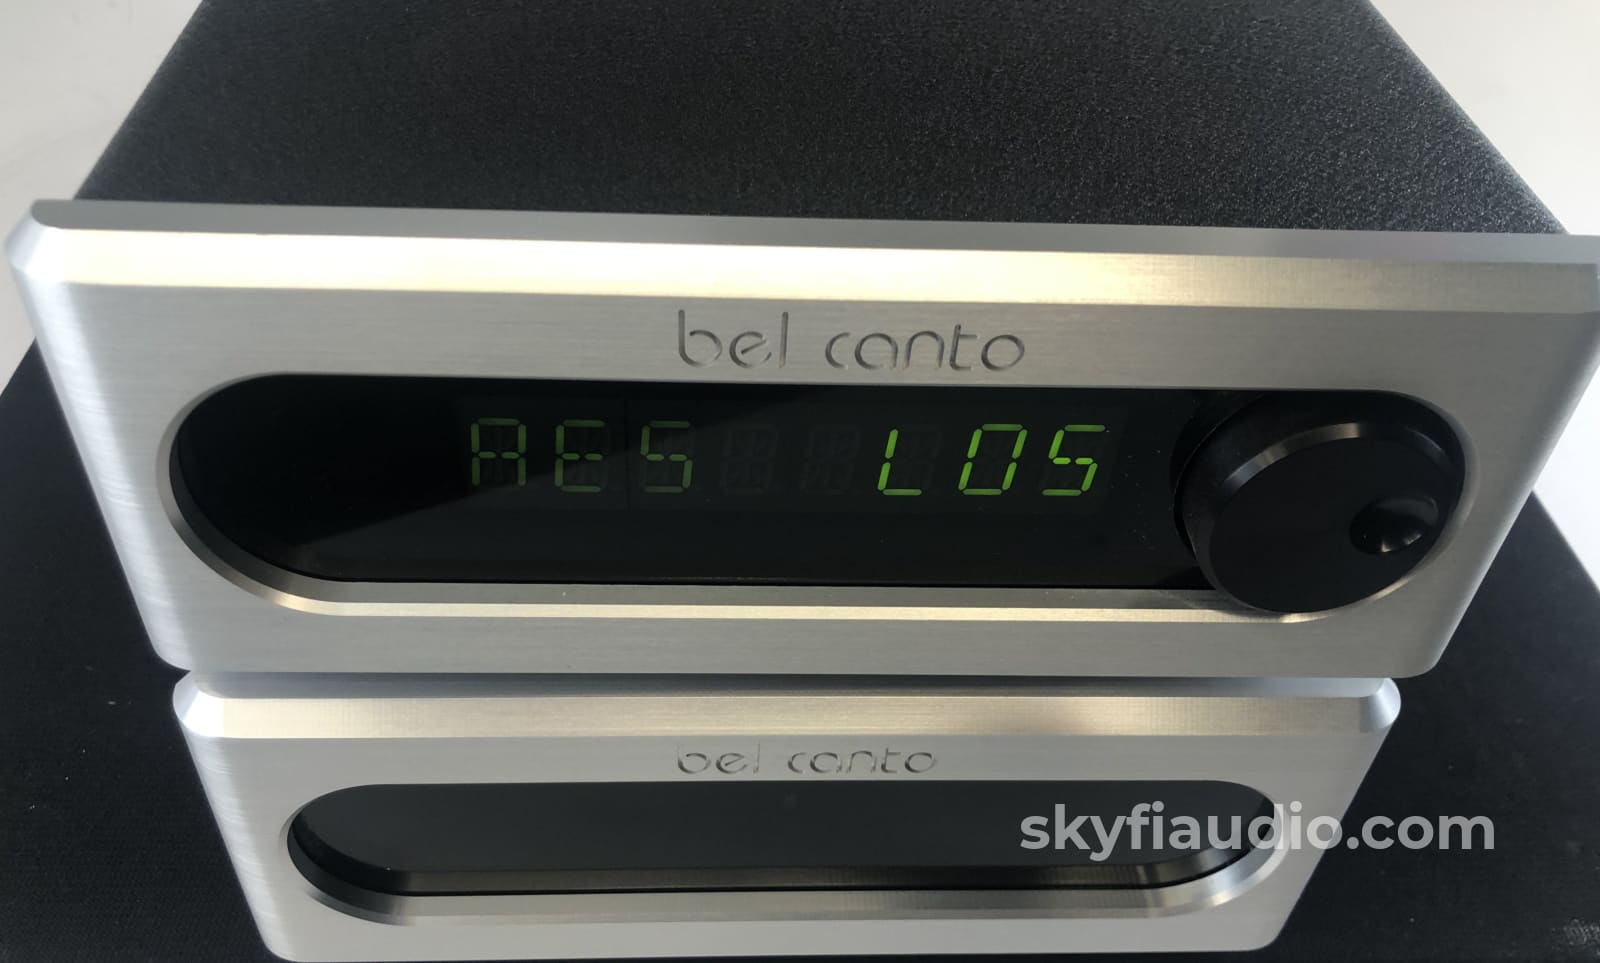 Bel Canto Dac3.5Vb D/A Converter And Vbs1 Virtual Power Supply - Complete Package Cd + Digital